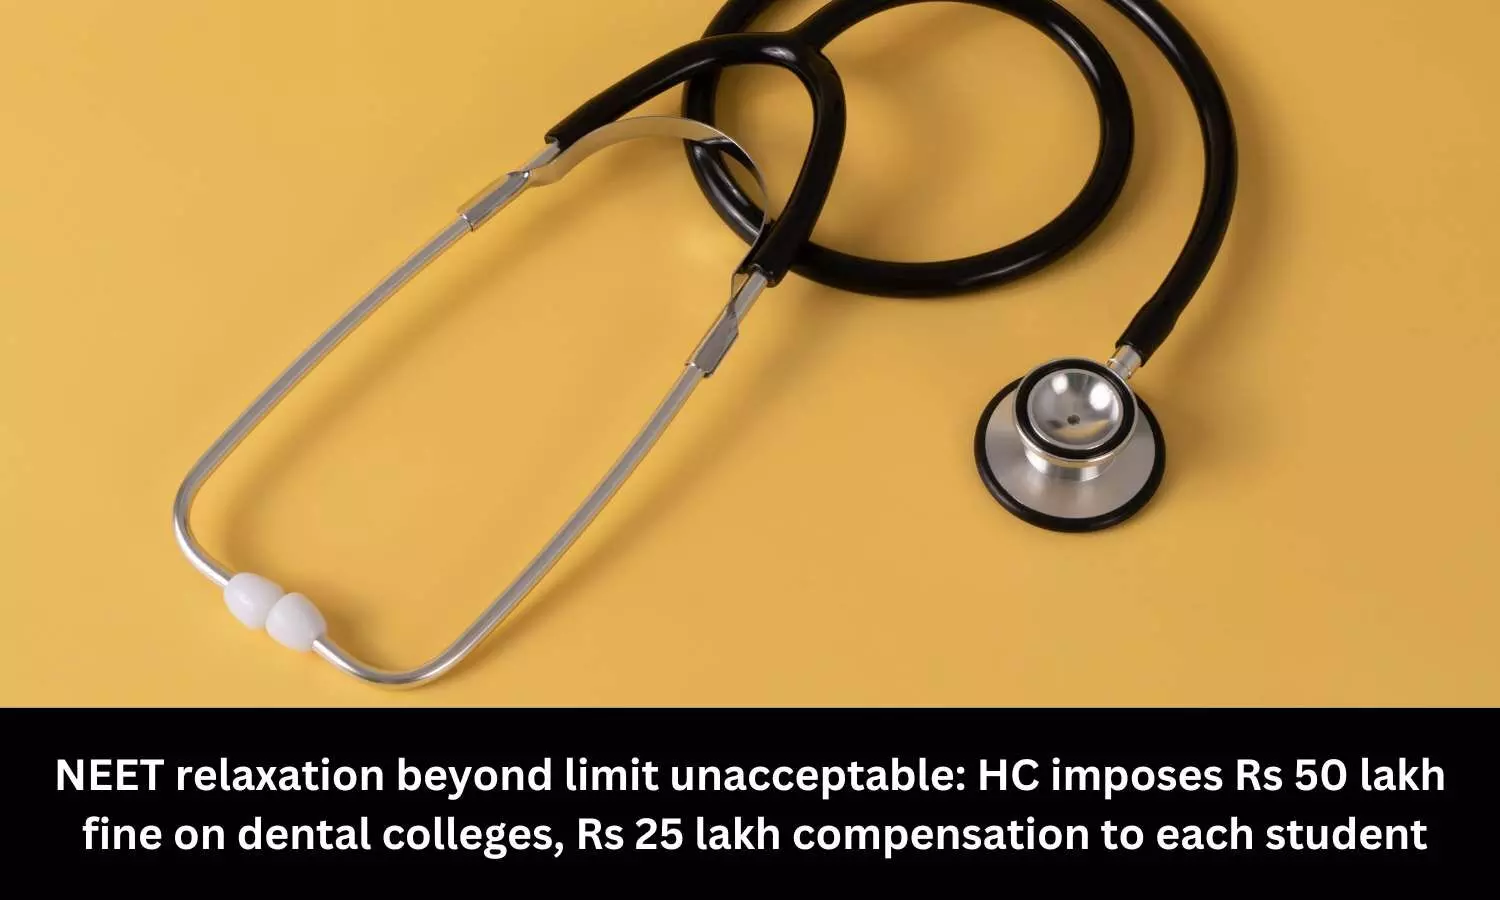 NEET relaxation beyond limit unacceptable: HC imposes Rs 50 lakh fine on dental colleges, Rs 25 lakh compensation to each student